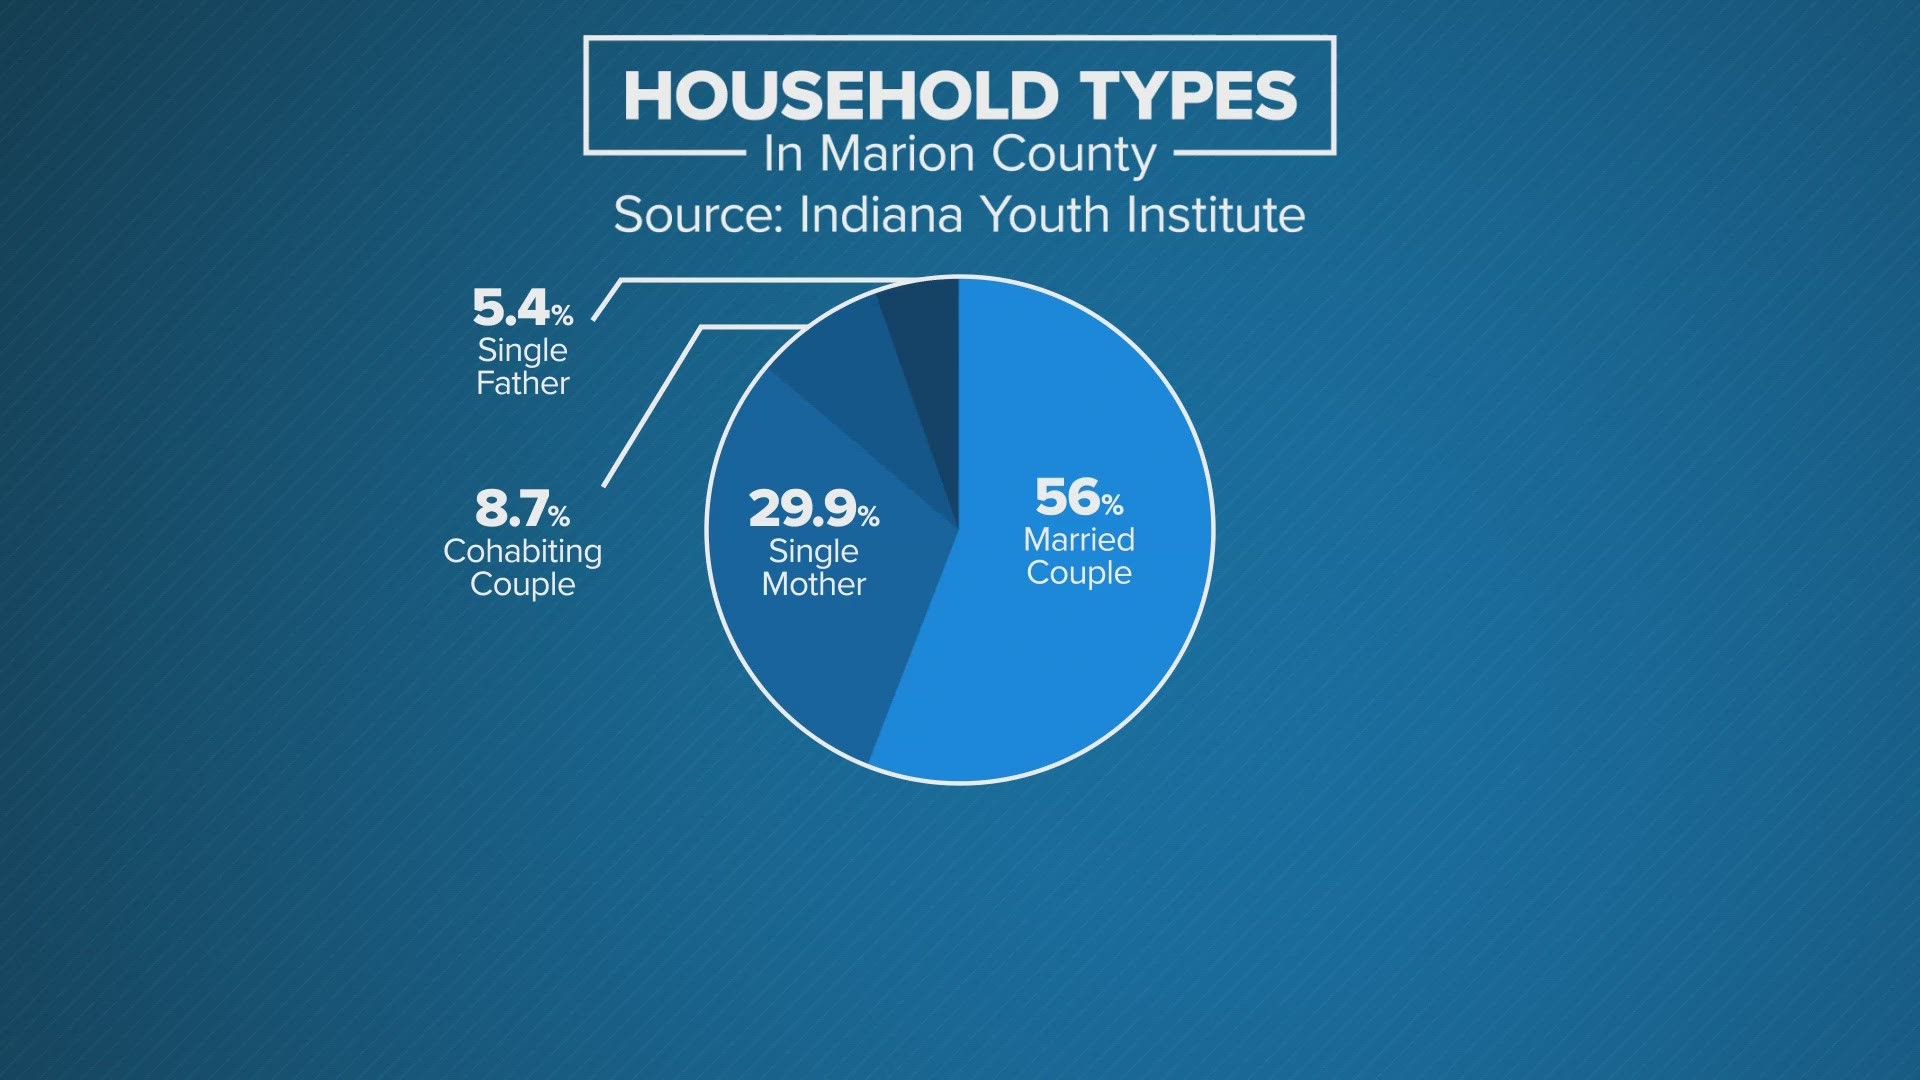 More than one-in-three Hoosier children are living in single-parent homes.